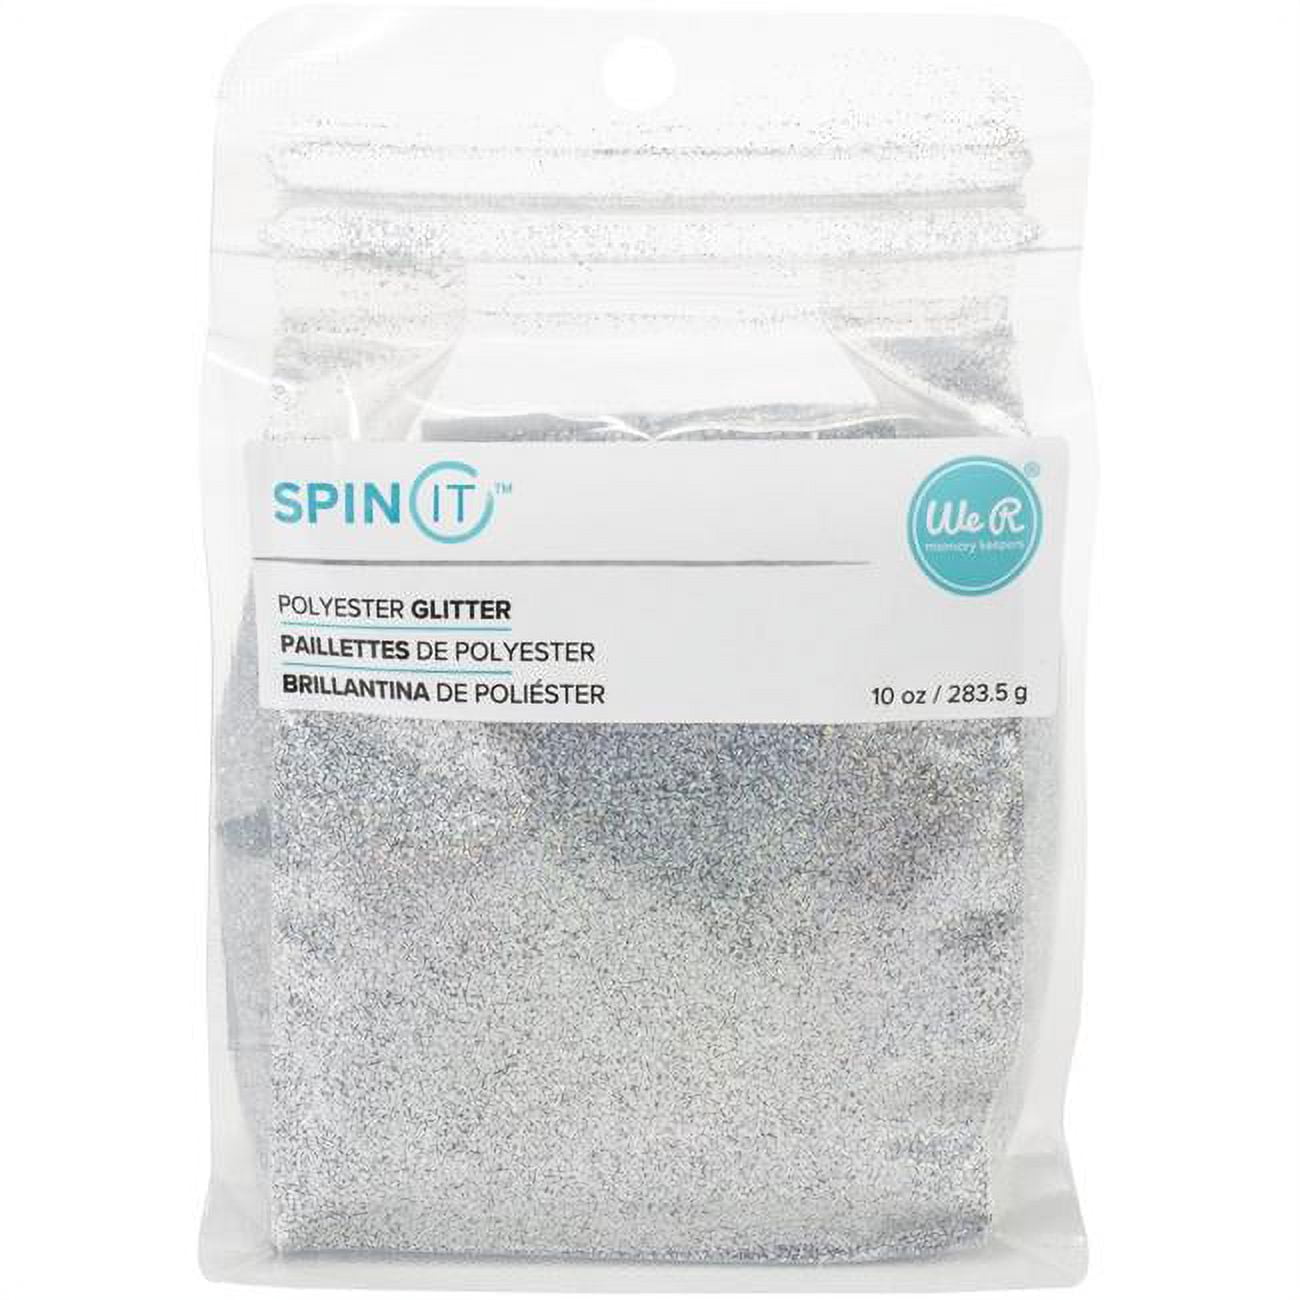 Sulyn Extra Fine Glitter for Crafts, Emerald Green, 2.5 oz 